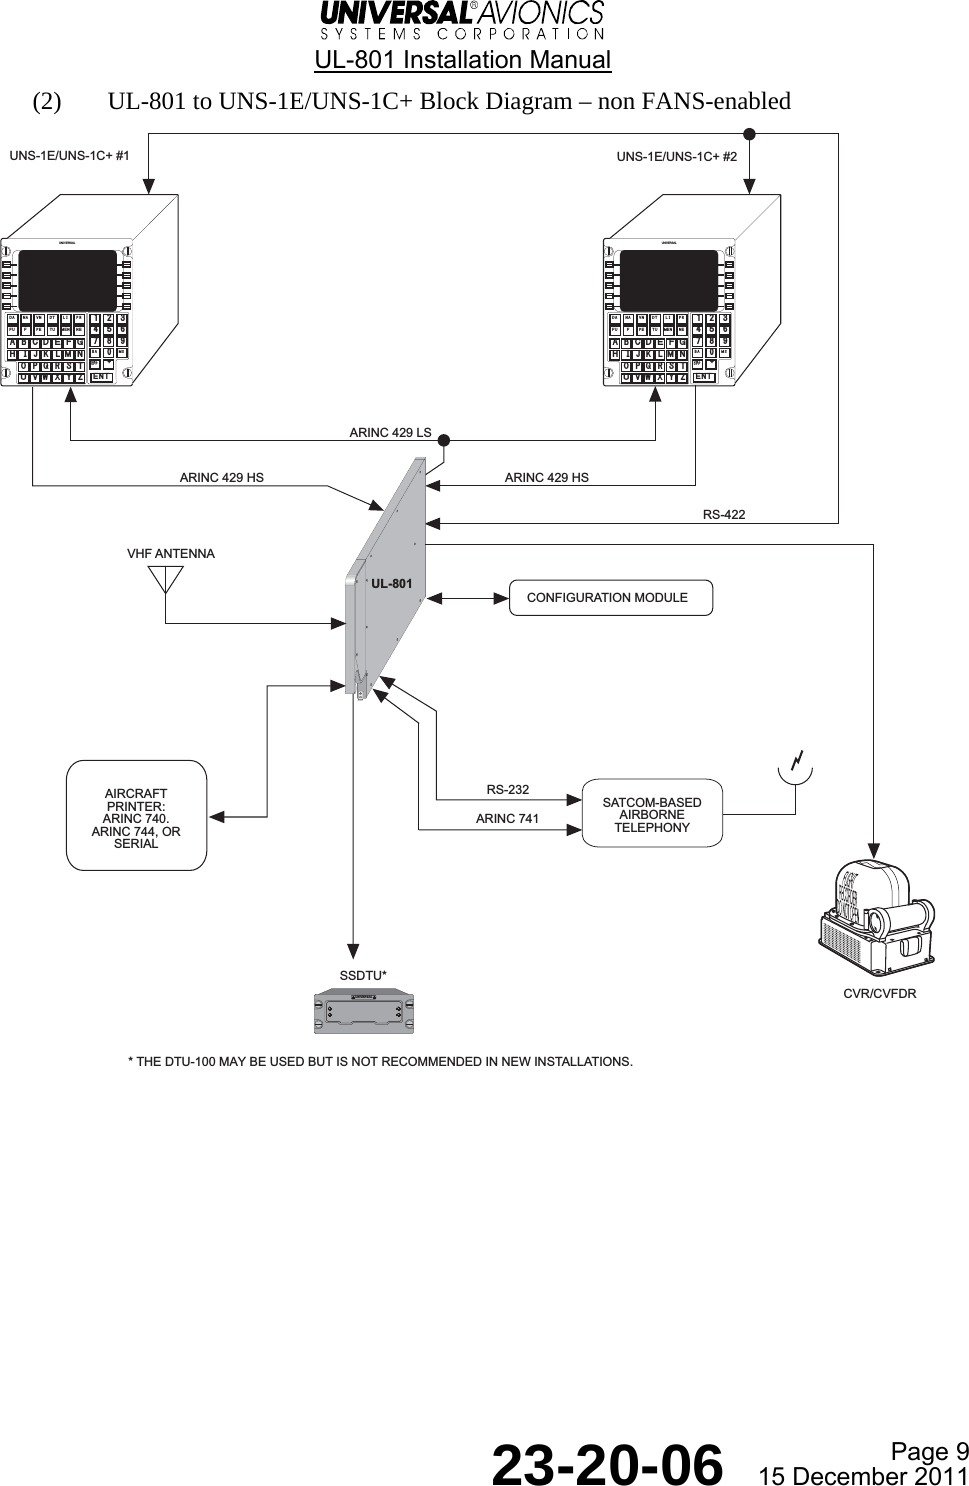  UL-801 Installation Manual  Page 9  23-20-06  15 December 2011 (2) UL-801 to UNS-1E/UNS-1C+ Block Diagram – non FANS-enabled  UNS-1E/UNS-1C+ #1 UNS-1E/UNS-1C+ #2ARINC 429 HSRS-422ARINC 429 HSARINC 429 LSAIRCRAFTPRINTER:ARINC 740.ARINC 744, ORSERIALSATCOM-BASEDAIRBORNETELEPHONYUL-801UNIVERSALDA NA VN DT LI PRFU F PE TU MEN NEABCDEFGHIJKLMNOPQRSTUVWXYZ1234567890BA MSON/OFF±ENTUNIVERSALDA NA VN DT LI PRFU F PE TU MEN NEABCDEFGHIJKLMNOPQRSTUVWXYZ1234567890BA MSON/OFF±ENTUNIVERSALSSDTU** THE DTU-100 MAY BE USED BUT IS NOT RECOMMENDED IN NEW INSTALLATIONS.RS-232ARINC 741CONFIGURATION MODULECVR/CVFDRVHF ANTENNA